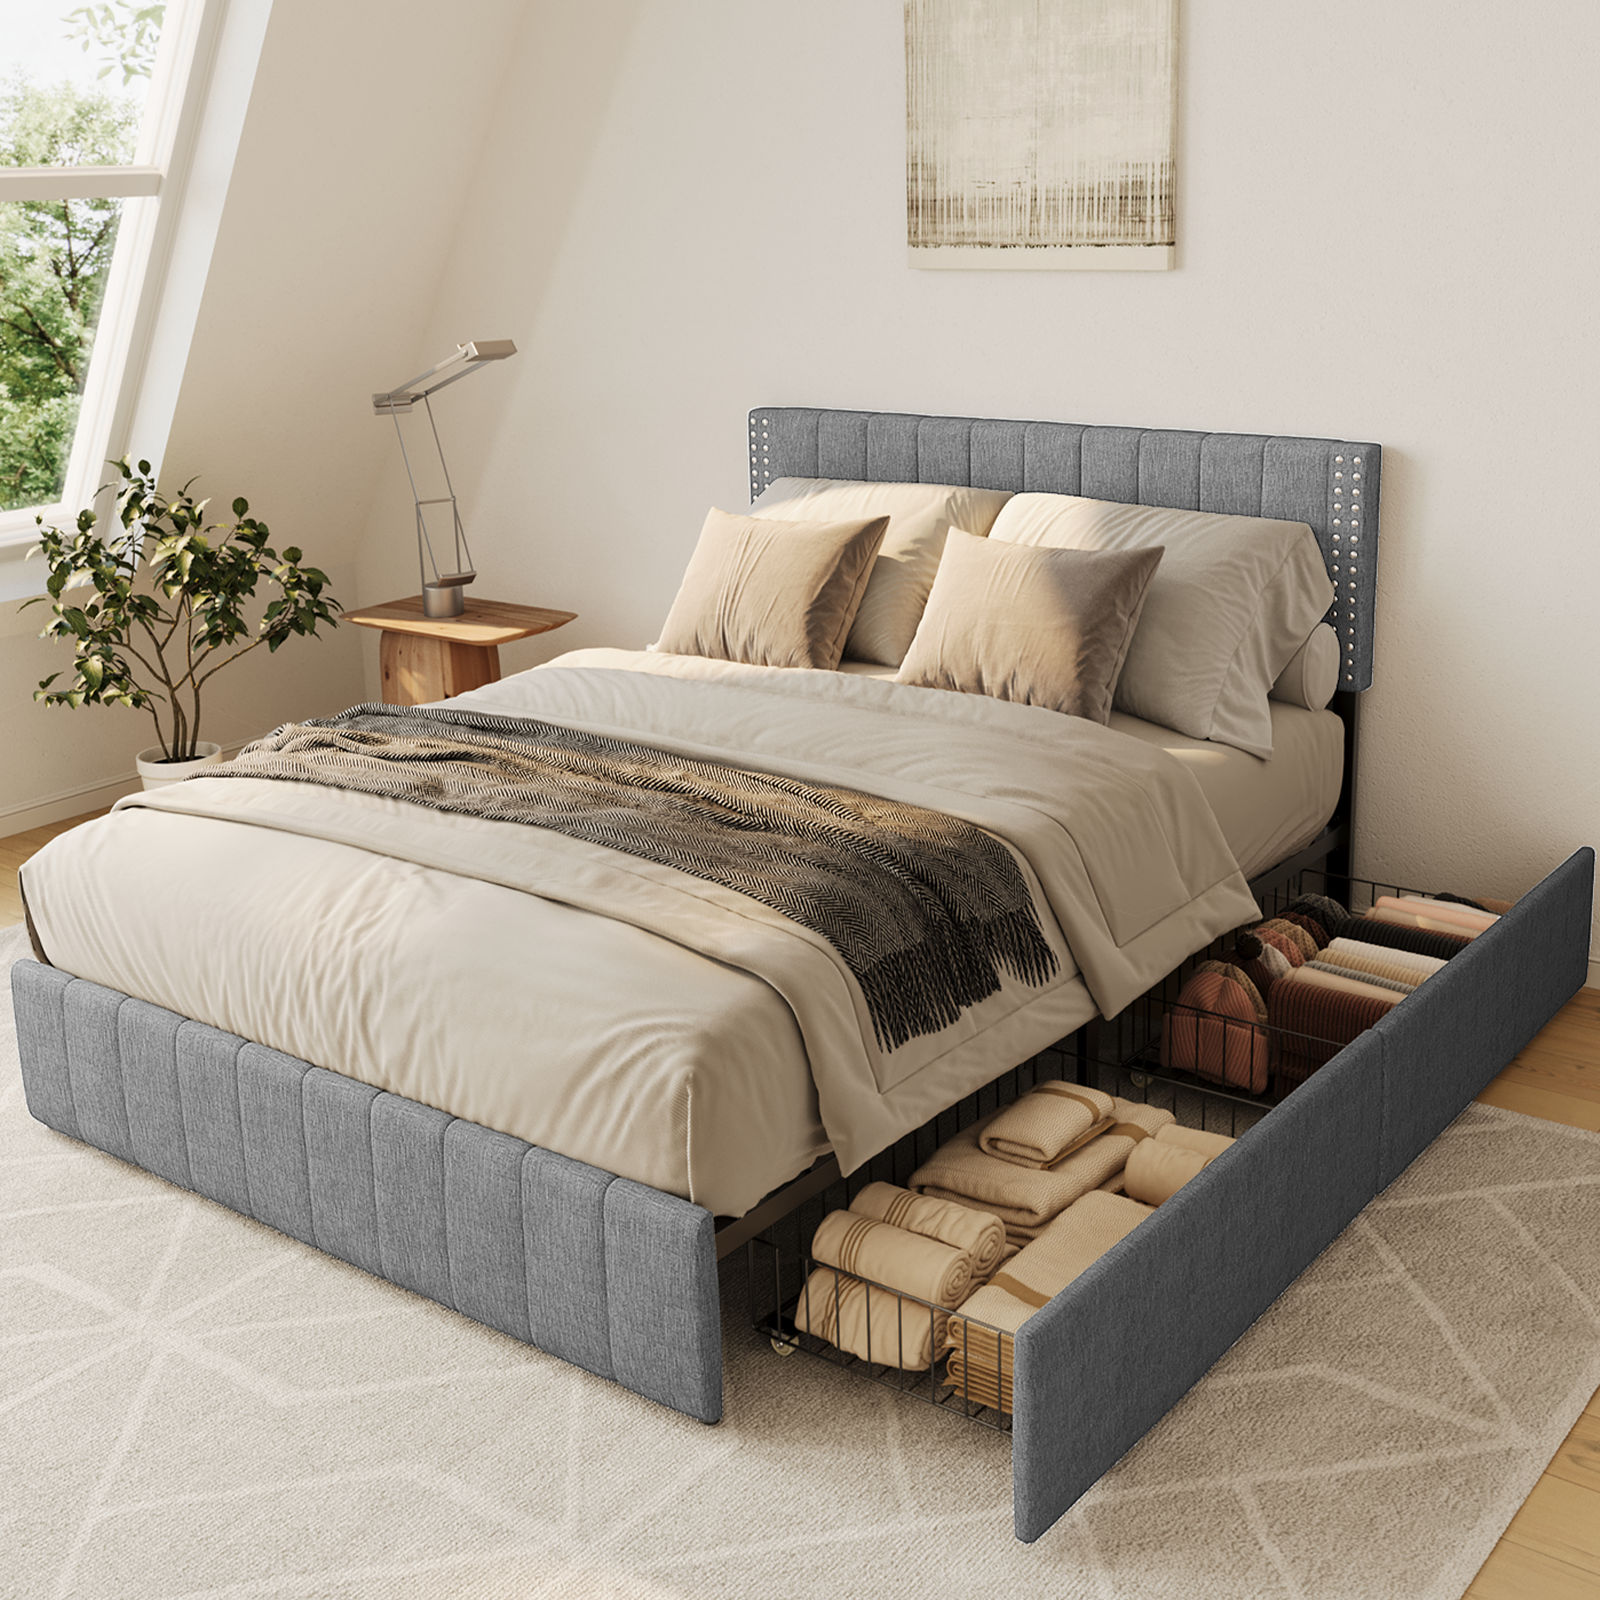 Bed Frame Queen with 4 Storage Drawers for Bedroom, Light Grey - image 1 of 10